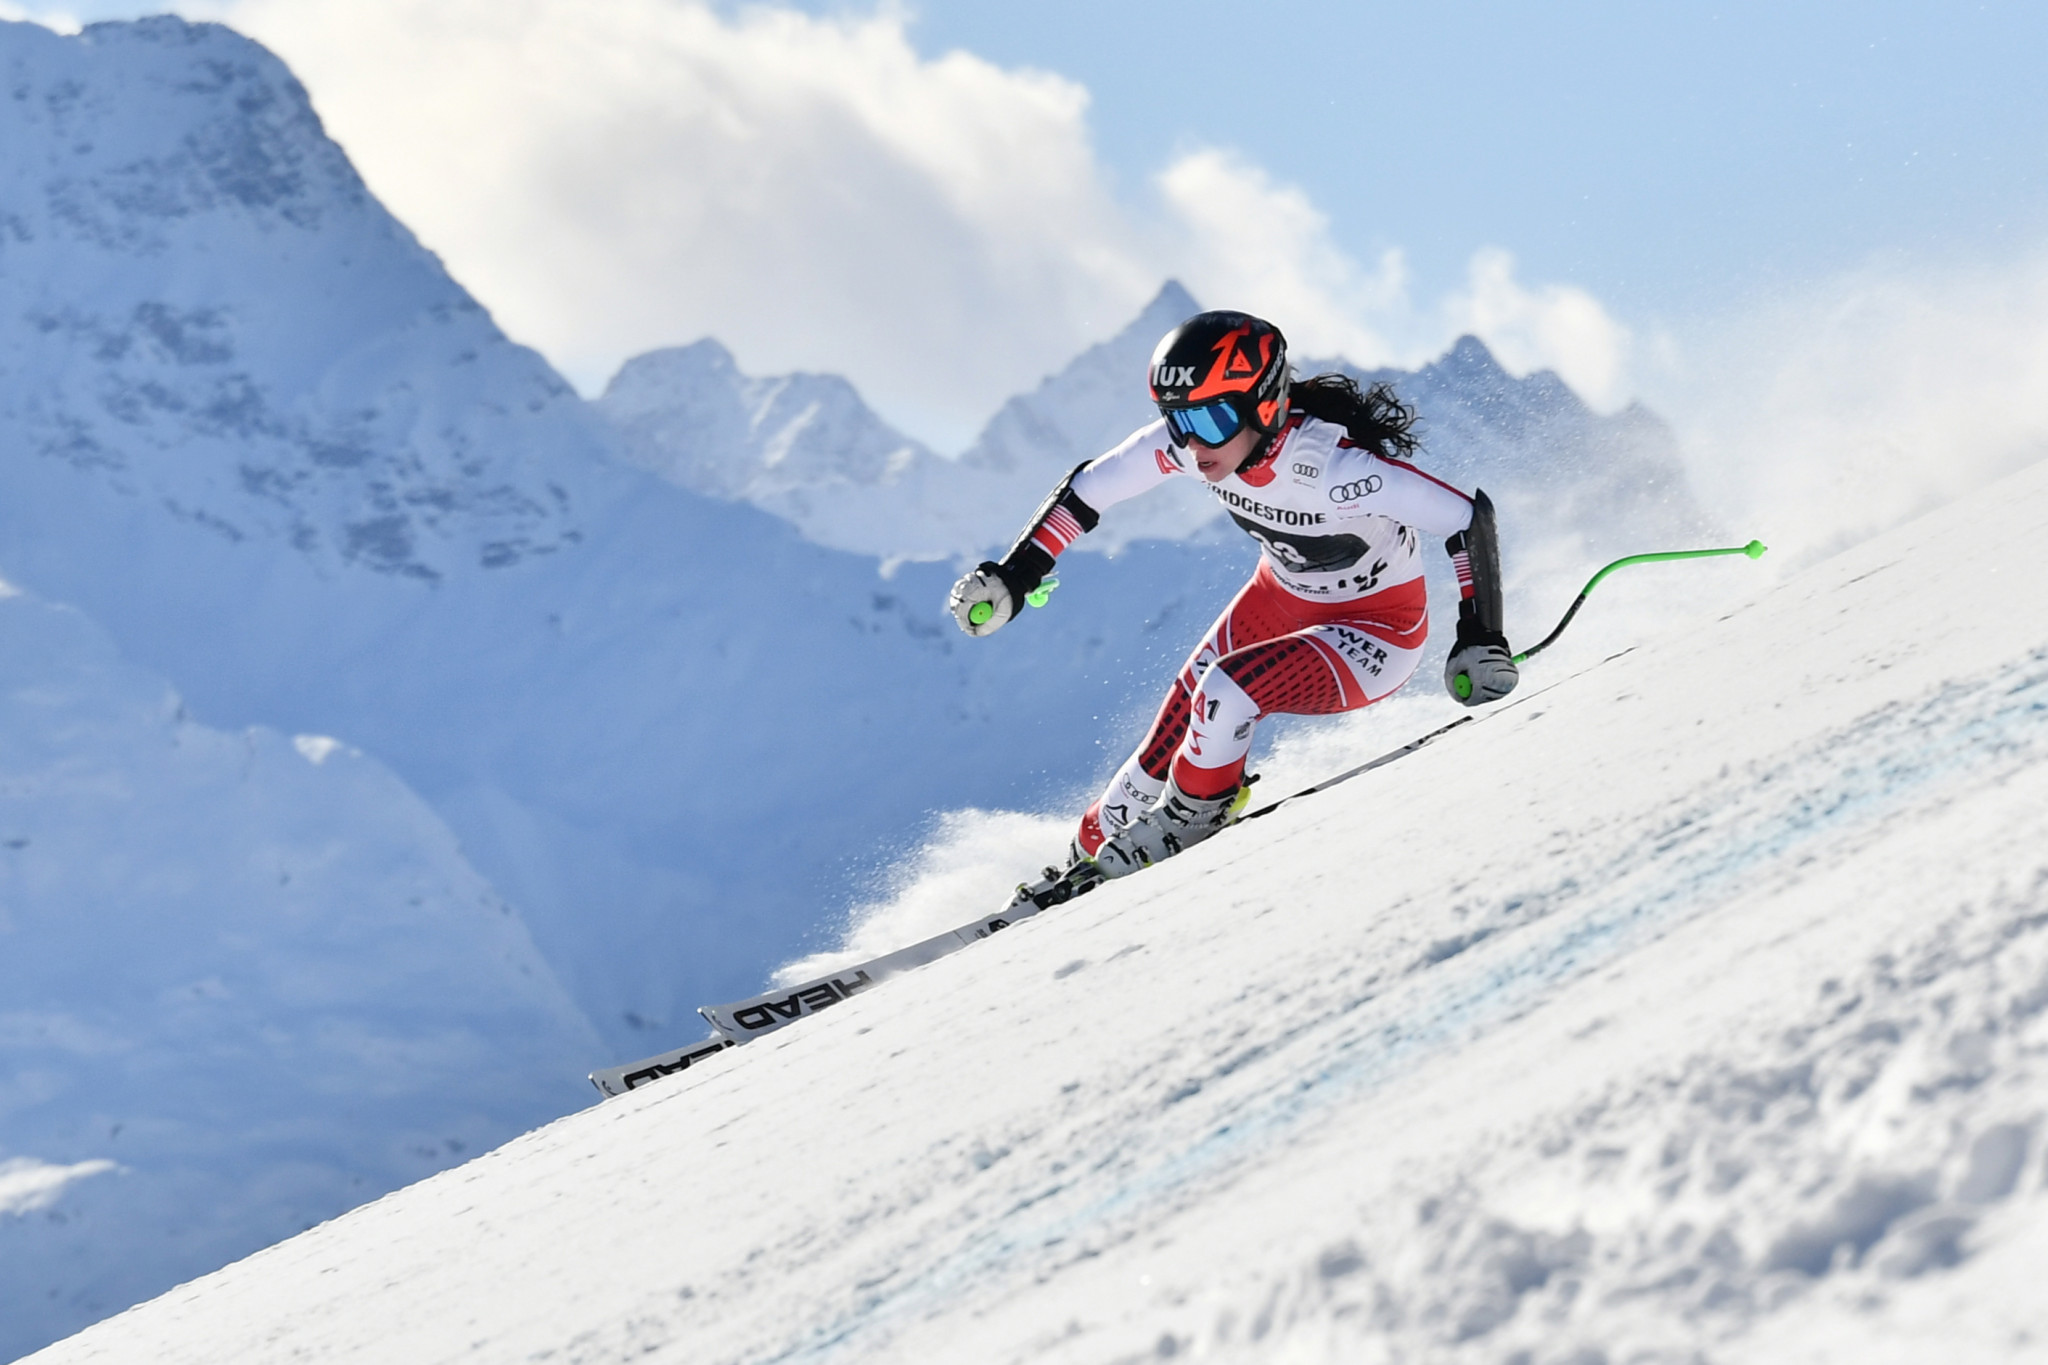 Austria's Brunner returns to snow training 12 months after tearing ACL